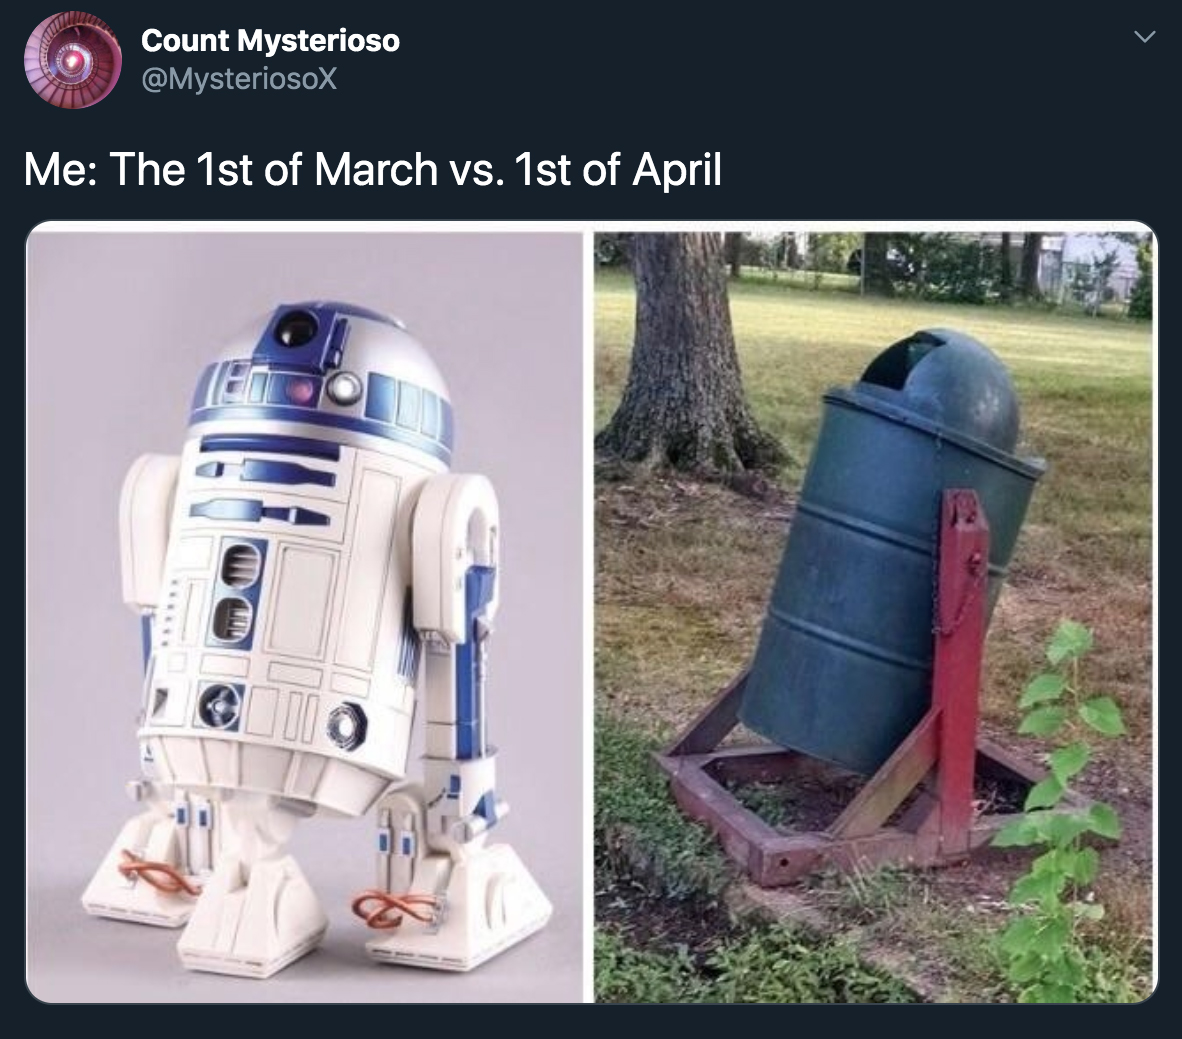 another young actors ruined by drugs and alcohol - Me The 1st of March vs. 1st of April - R2D2 trashcan